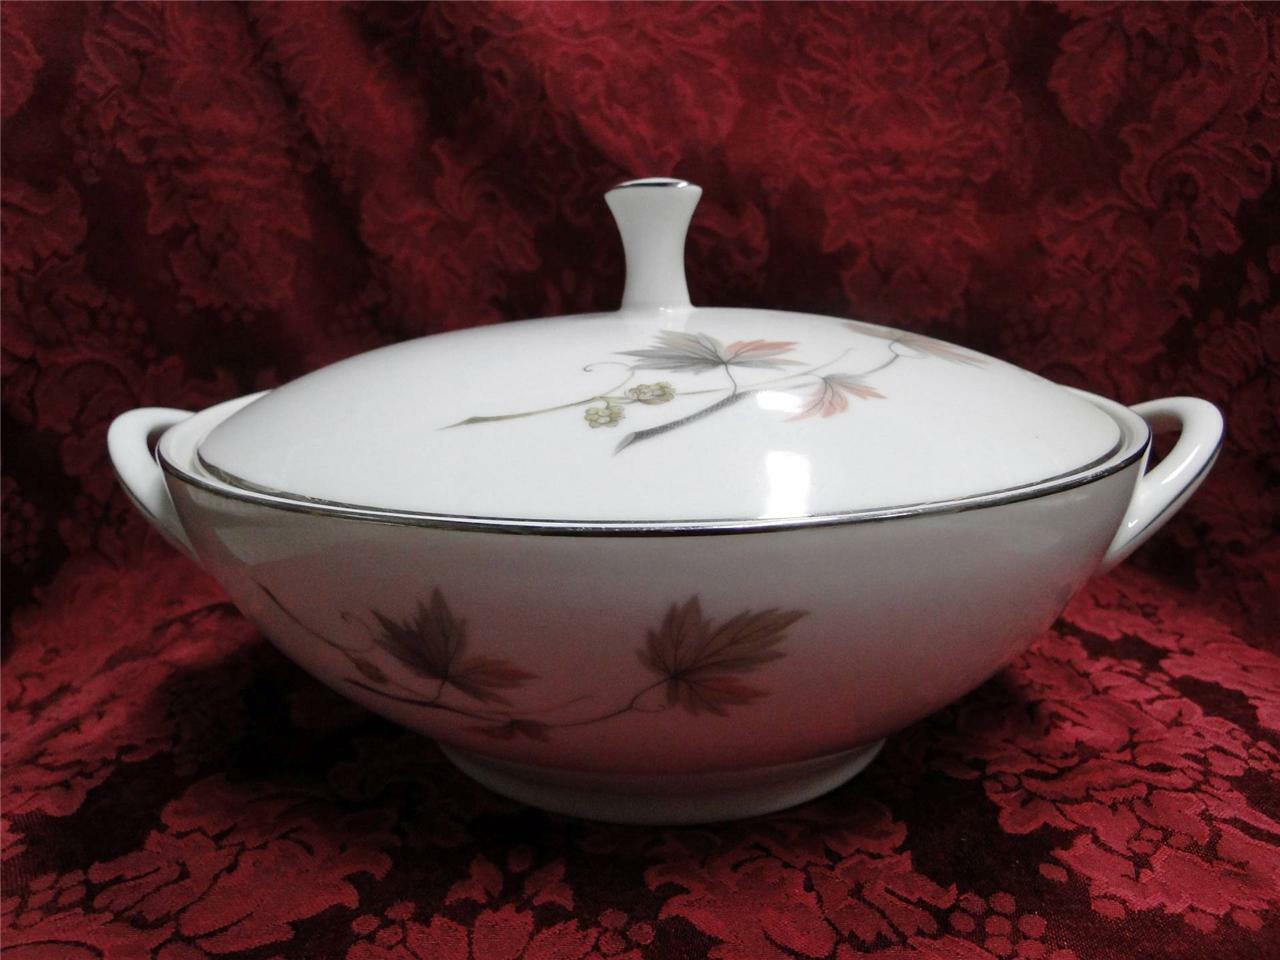 Noritake Oaklane, 6310, Taupe & Peach Leaves: Covered Serving Bowl & Lid, As Is